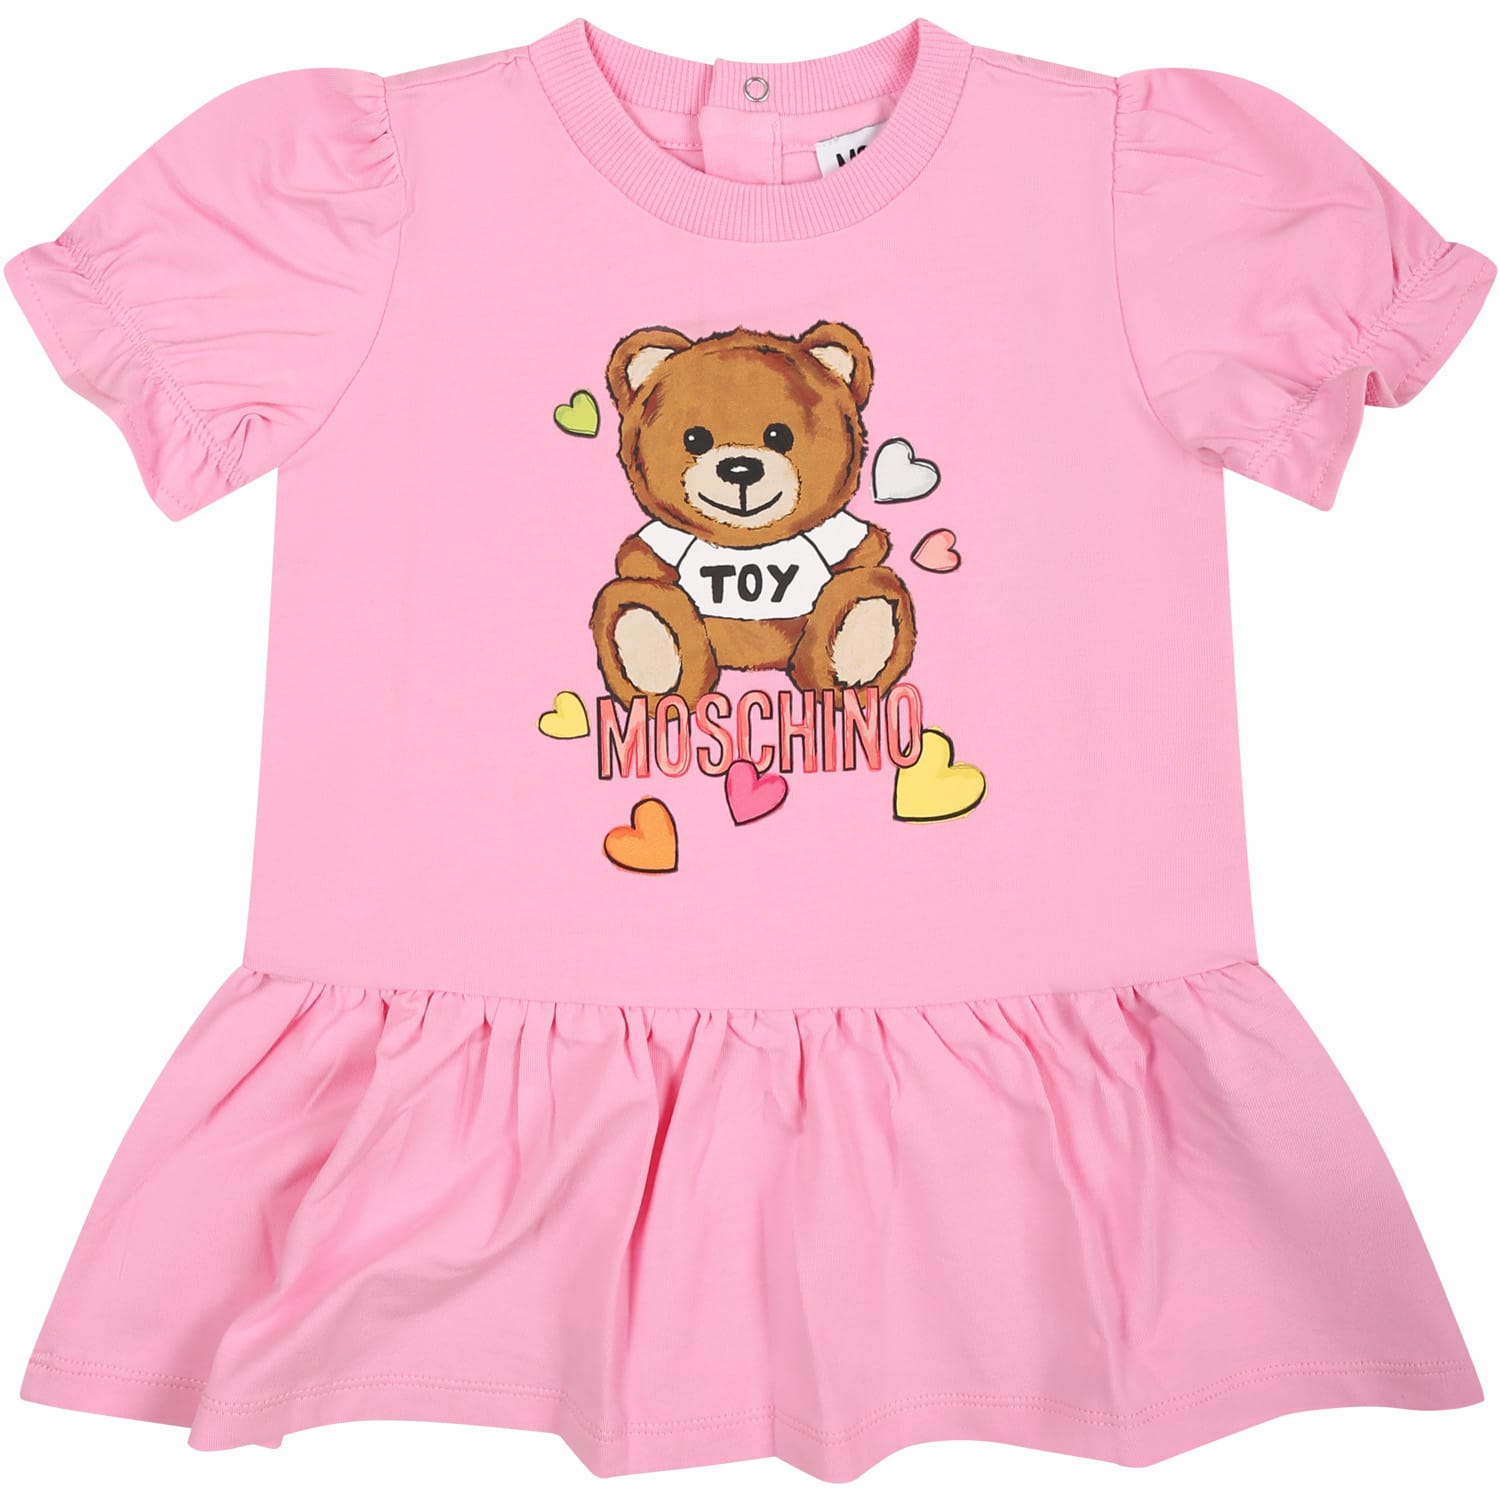 Moschino Pink Dress For Baby Girl With Teddy Bear Print